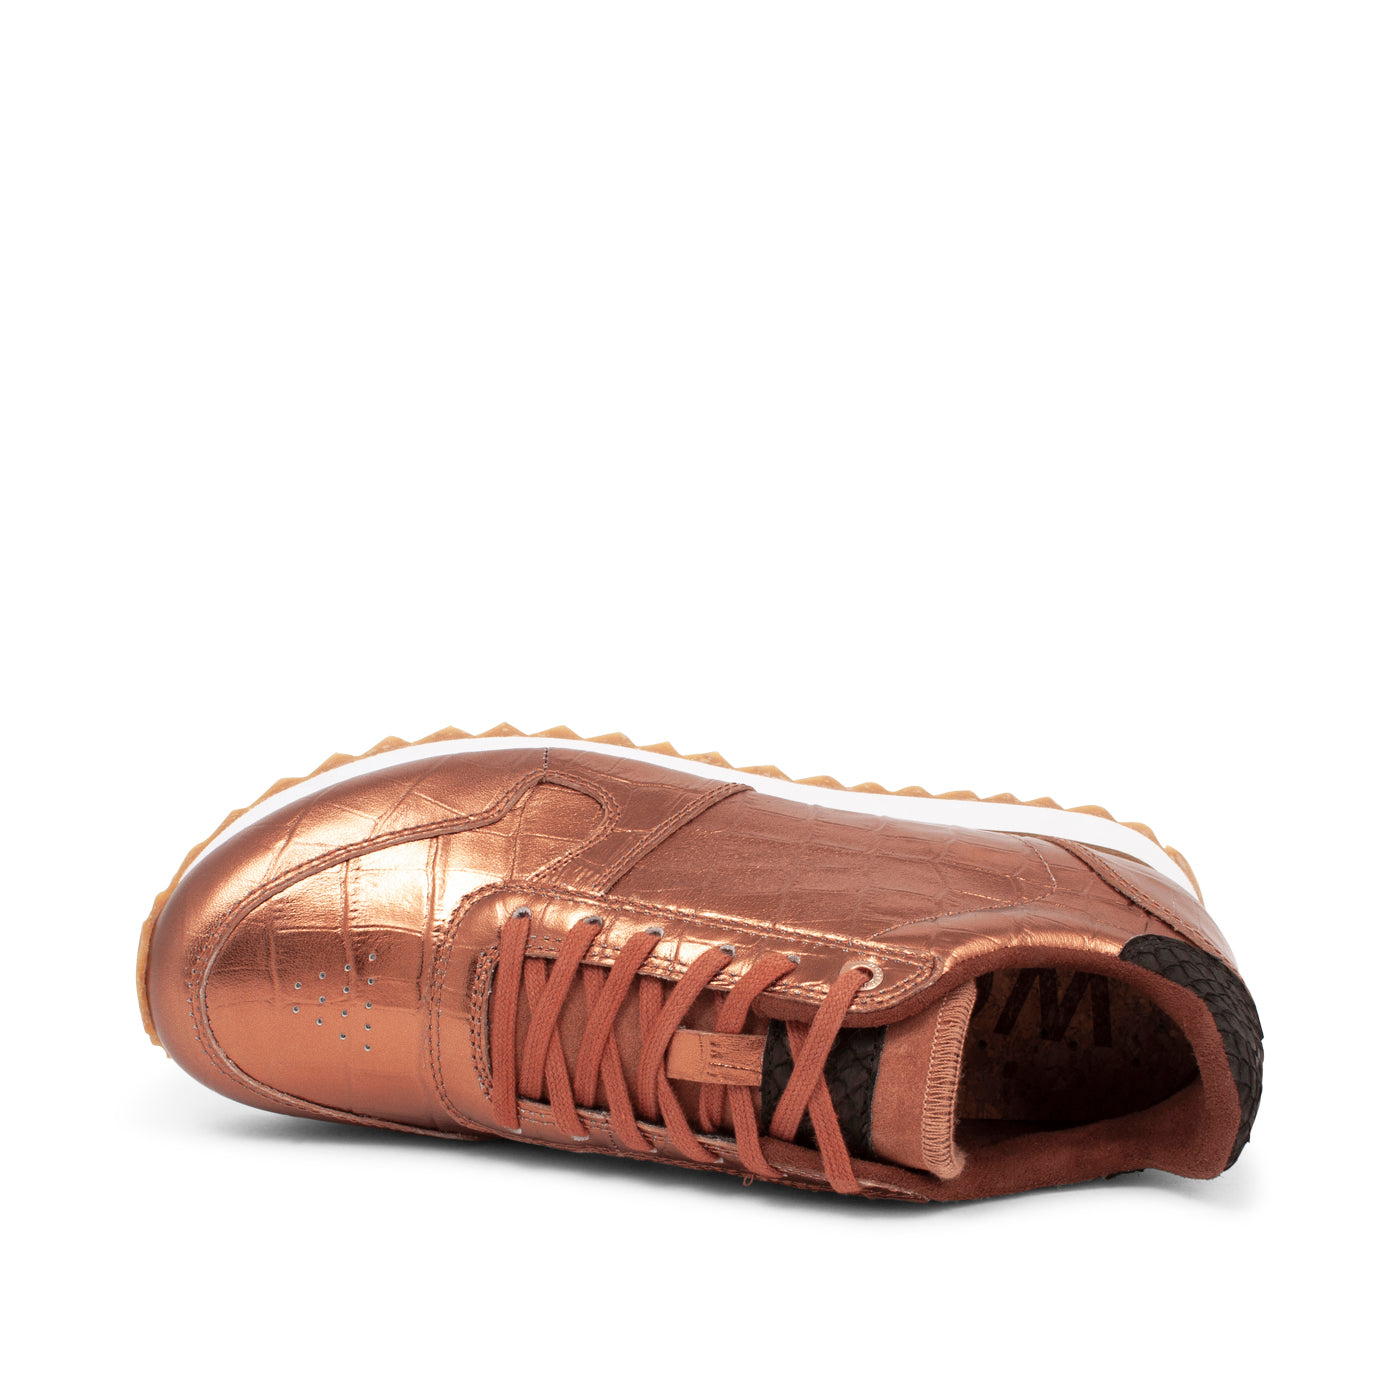 WODEN Ydun Shiny Leather Sneakers 002 Burnished Copper